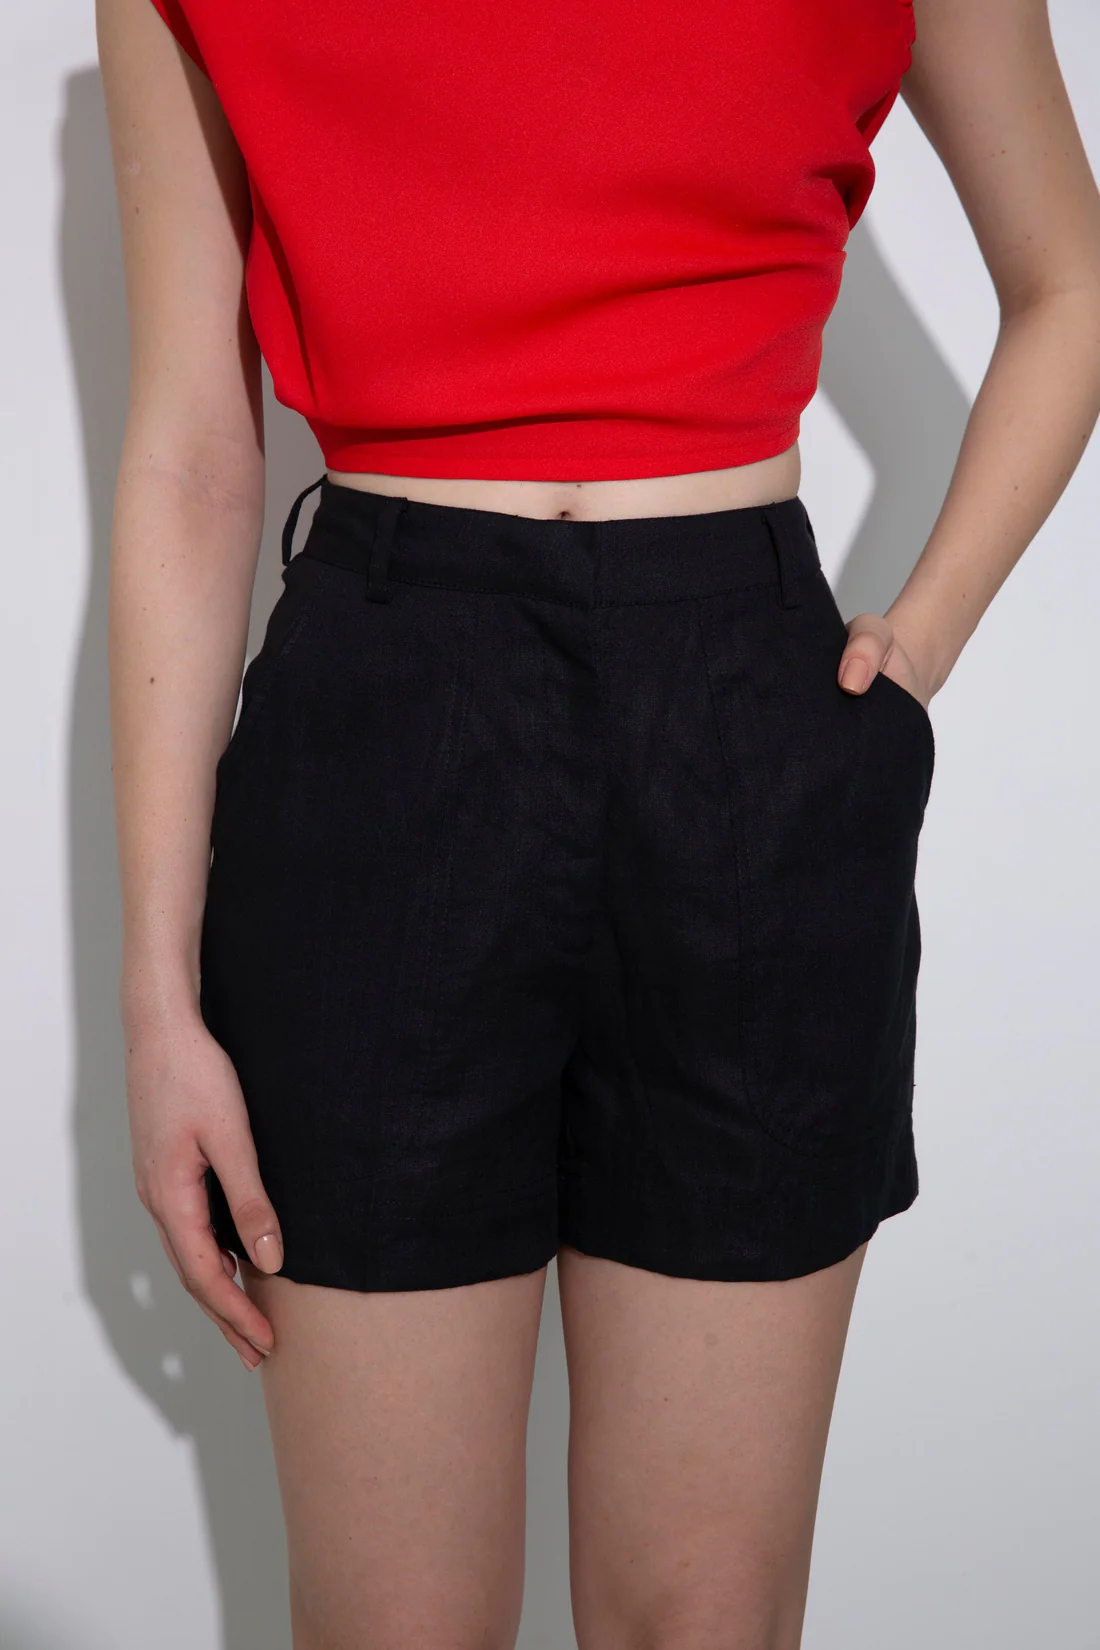 High waist Shorts, a product by Pocketful Of Cherrie